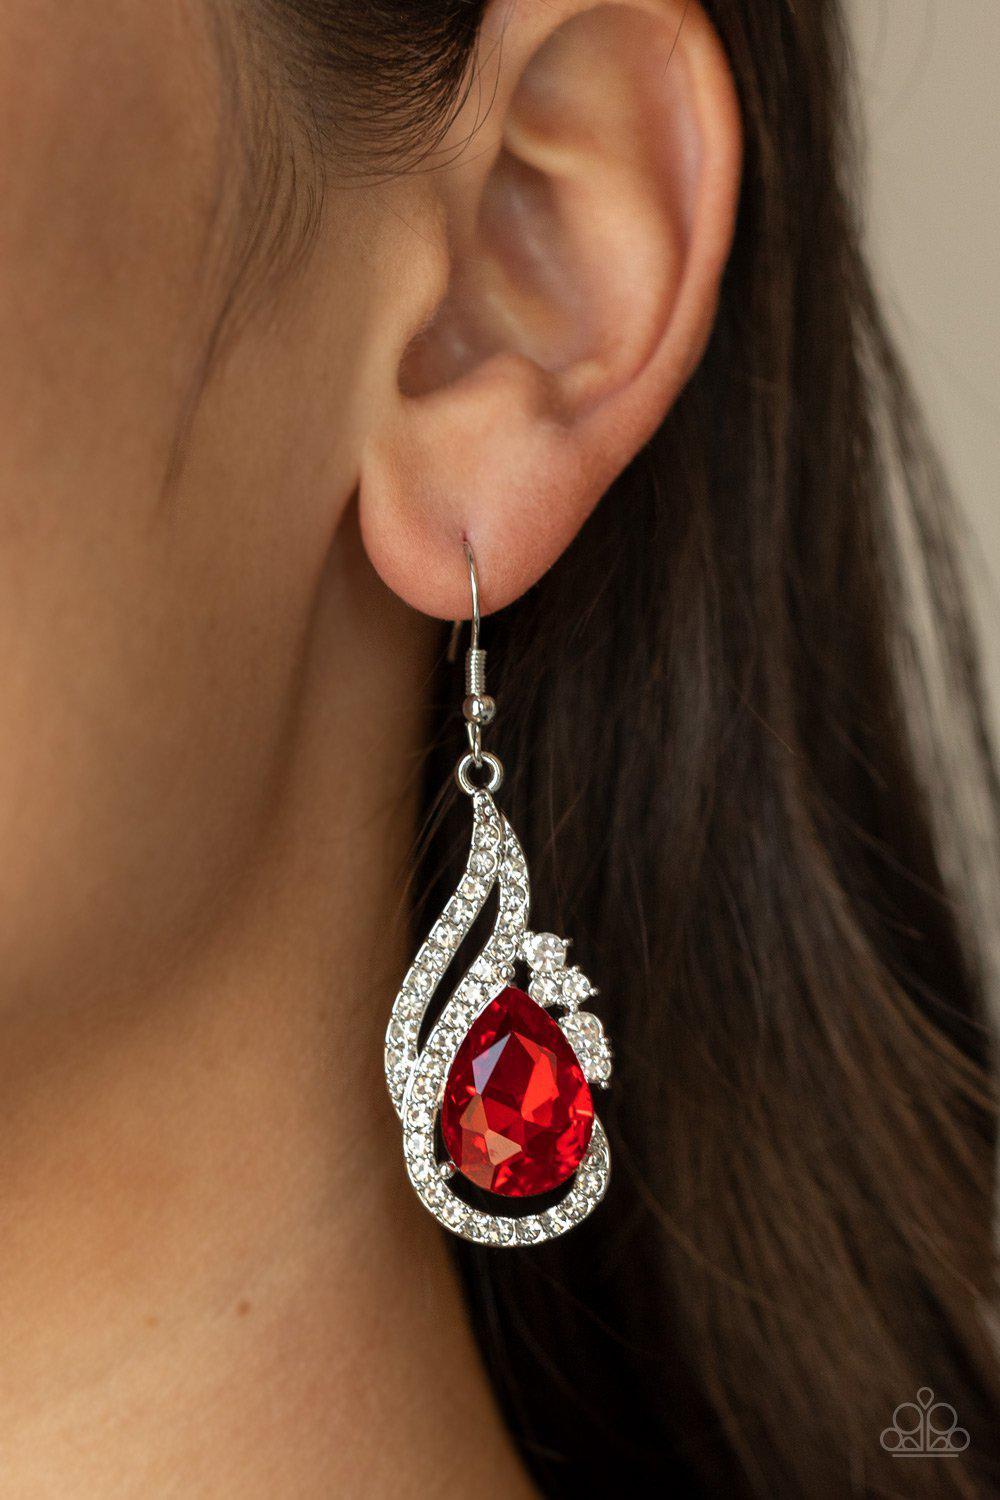 Dancefloor Diva Red and White Rhinestone Earrings - Paparazzi Accessories - model -CarasShop.com - $5 Jewelry by Cara Jewels